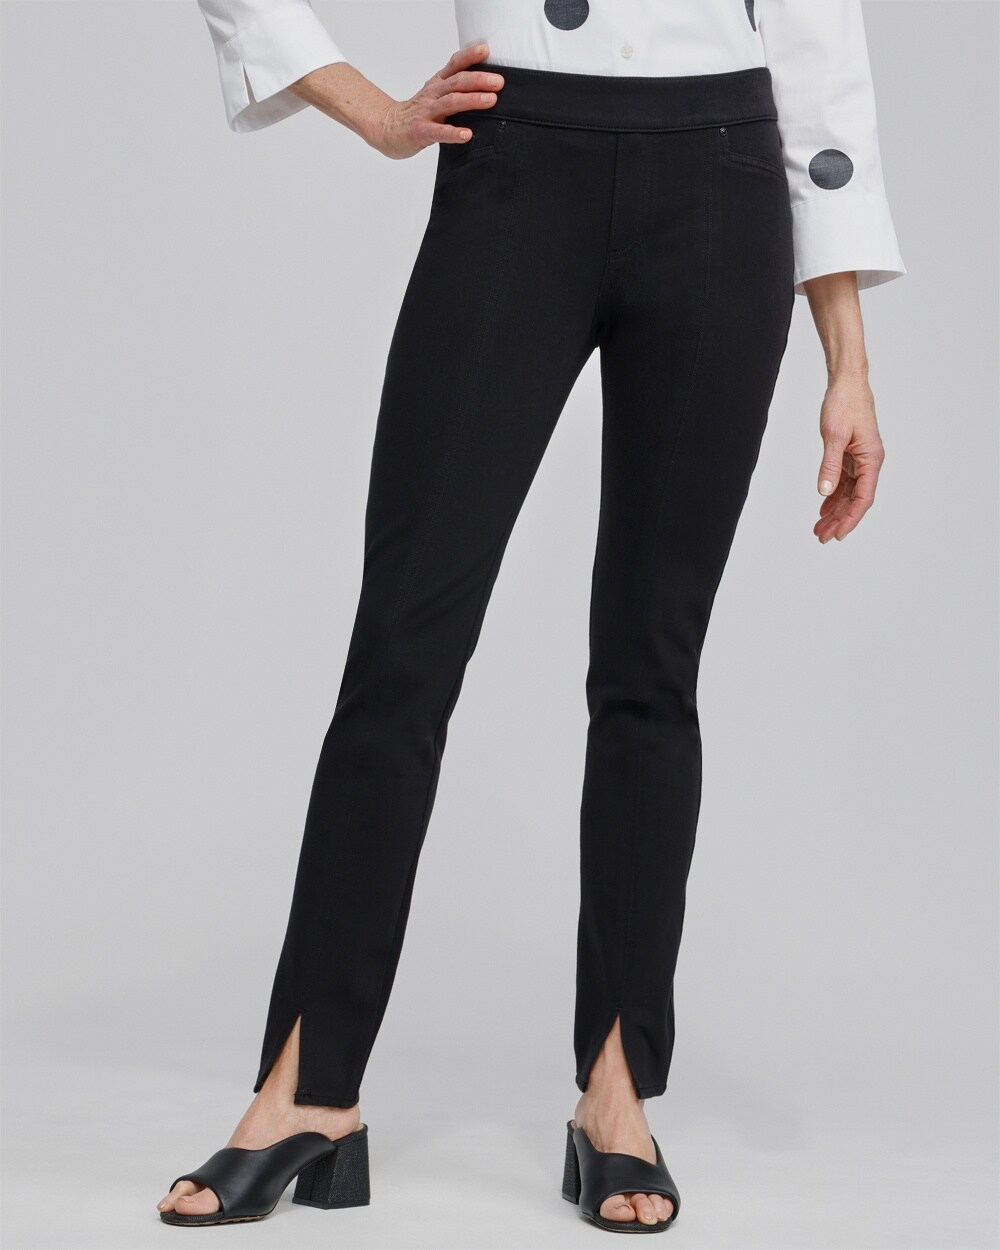 Travelers Collection Petite Side-Slit Crepe Pants - Chico's